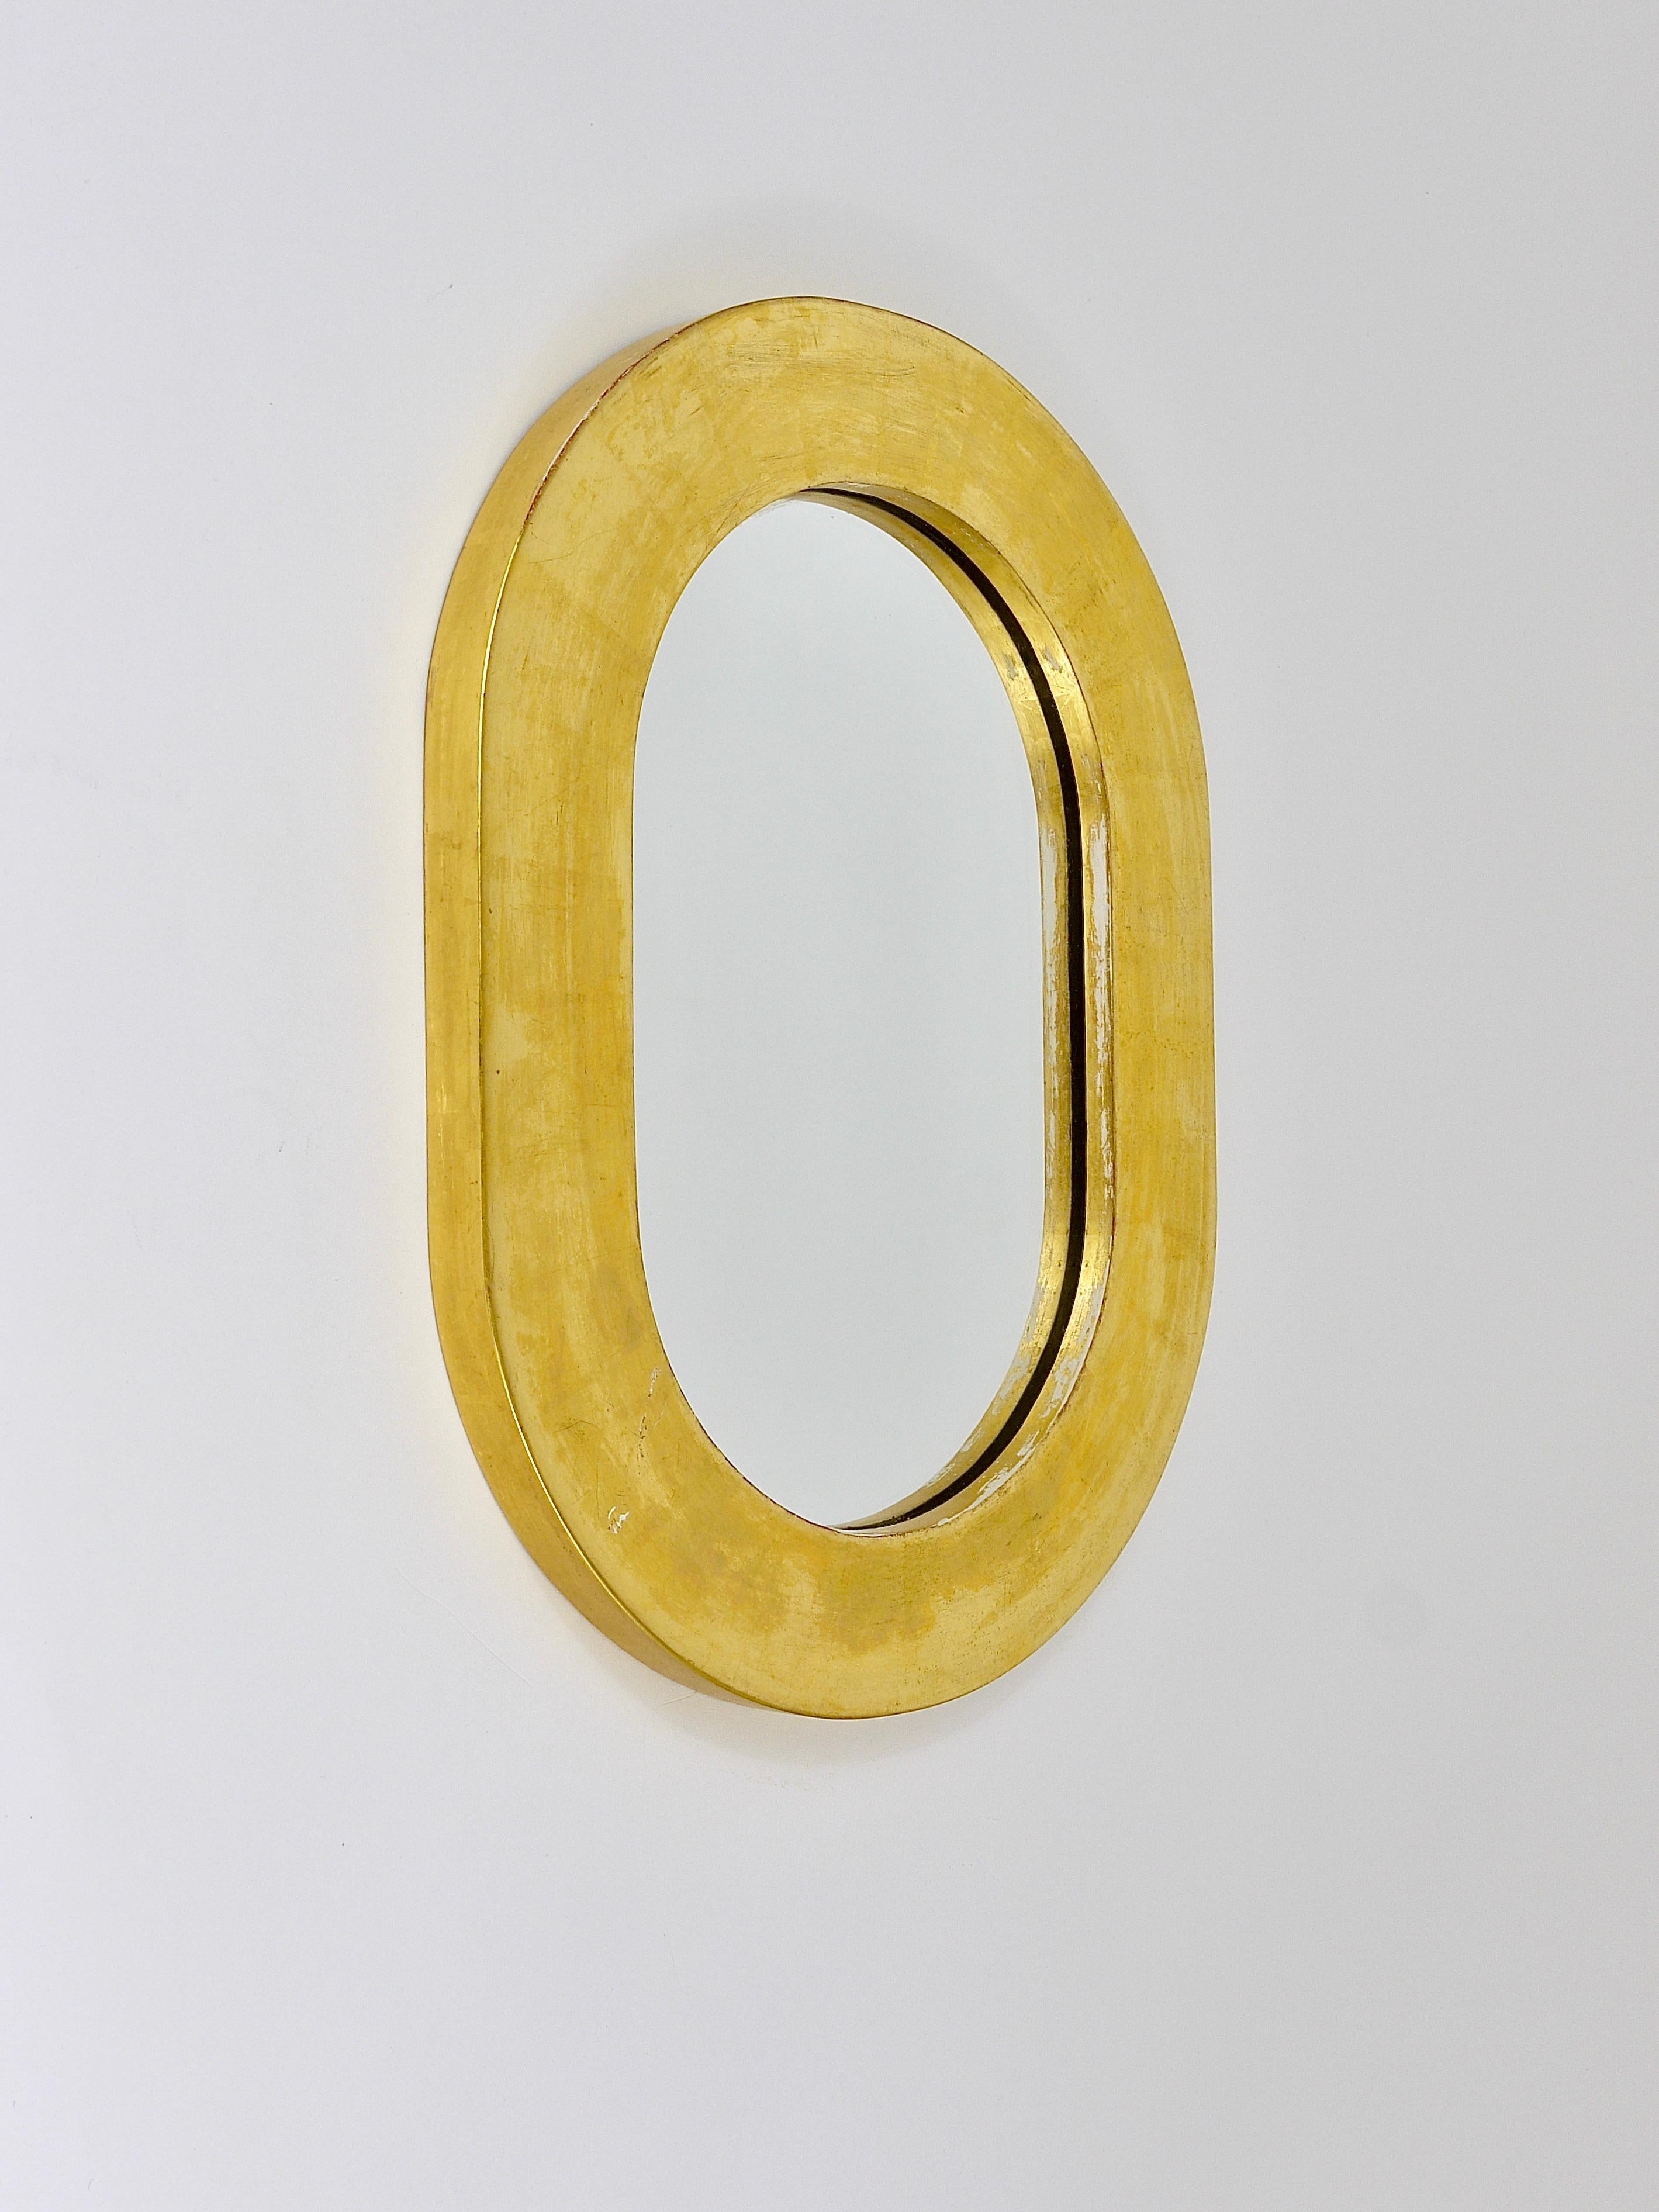 Beautiful Austrian modernist wall mirror. Designed and executed by Carl Aubock, Vienna/Austria. Made of gold-plated wood. In very good unrestored condition, with nice patina. Measures: 12 x 16